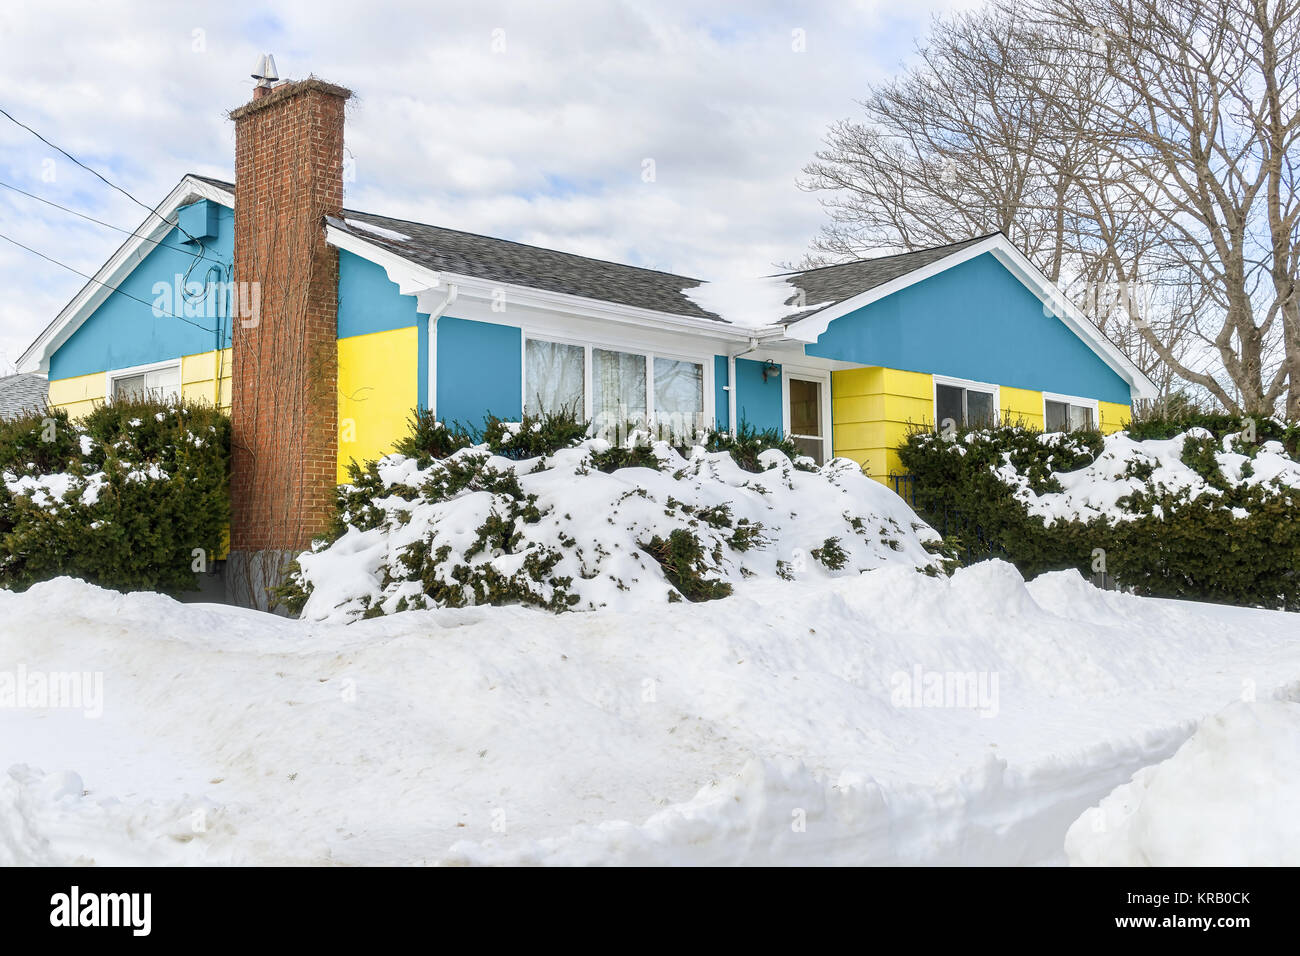 Older bungalow style home buried in snow. Stock Photo